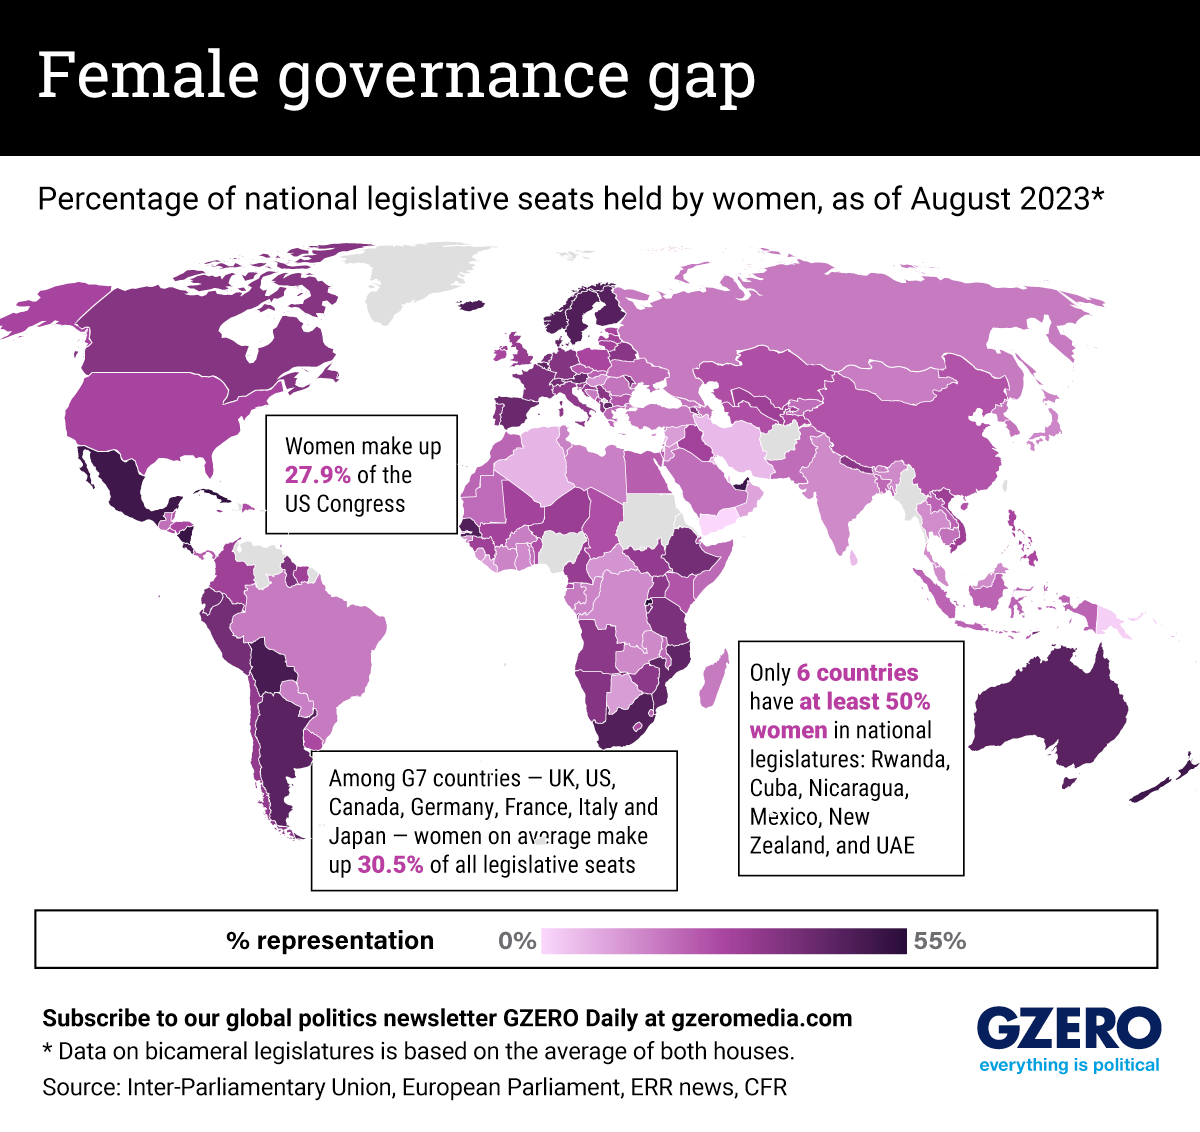 The Graphic Truth: Female governance gap